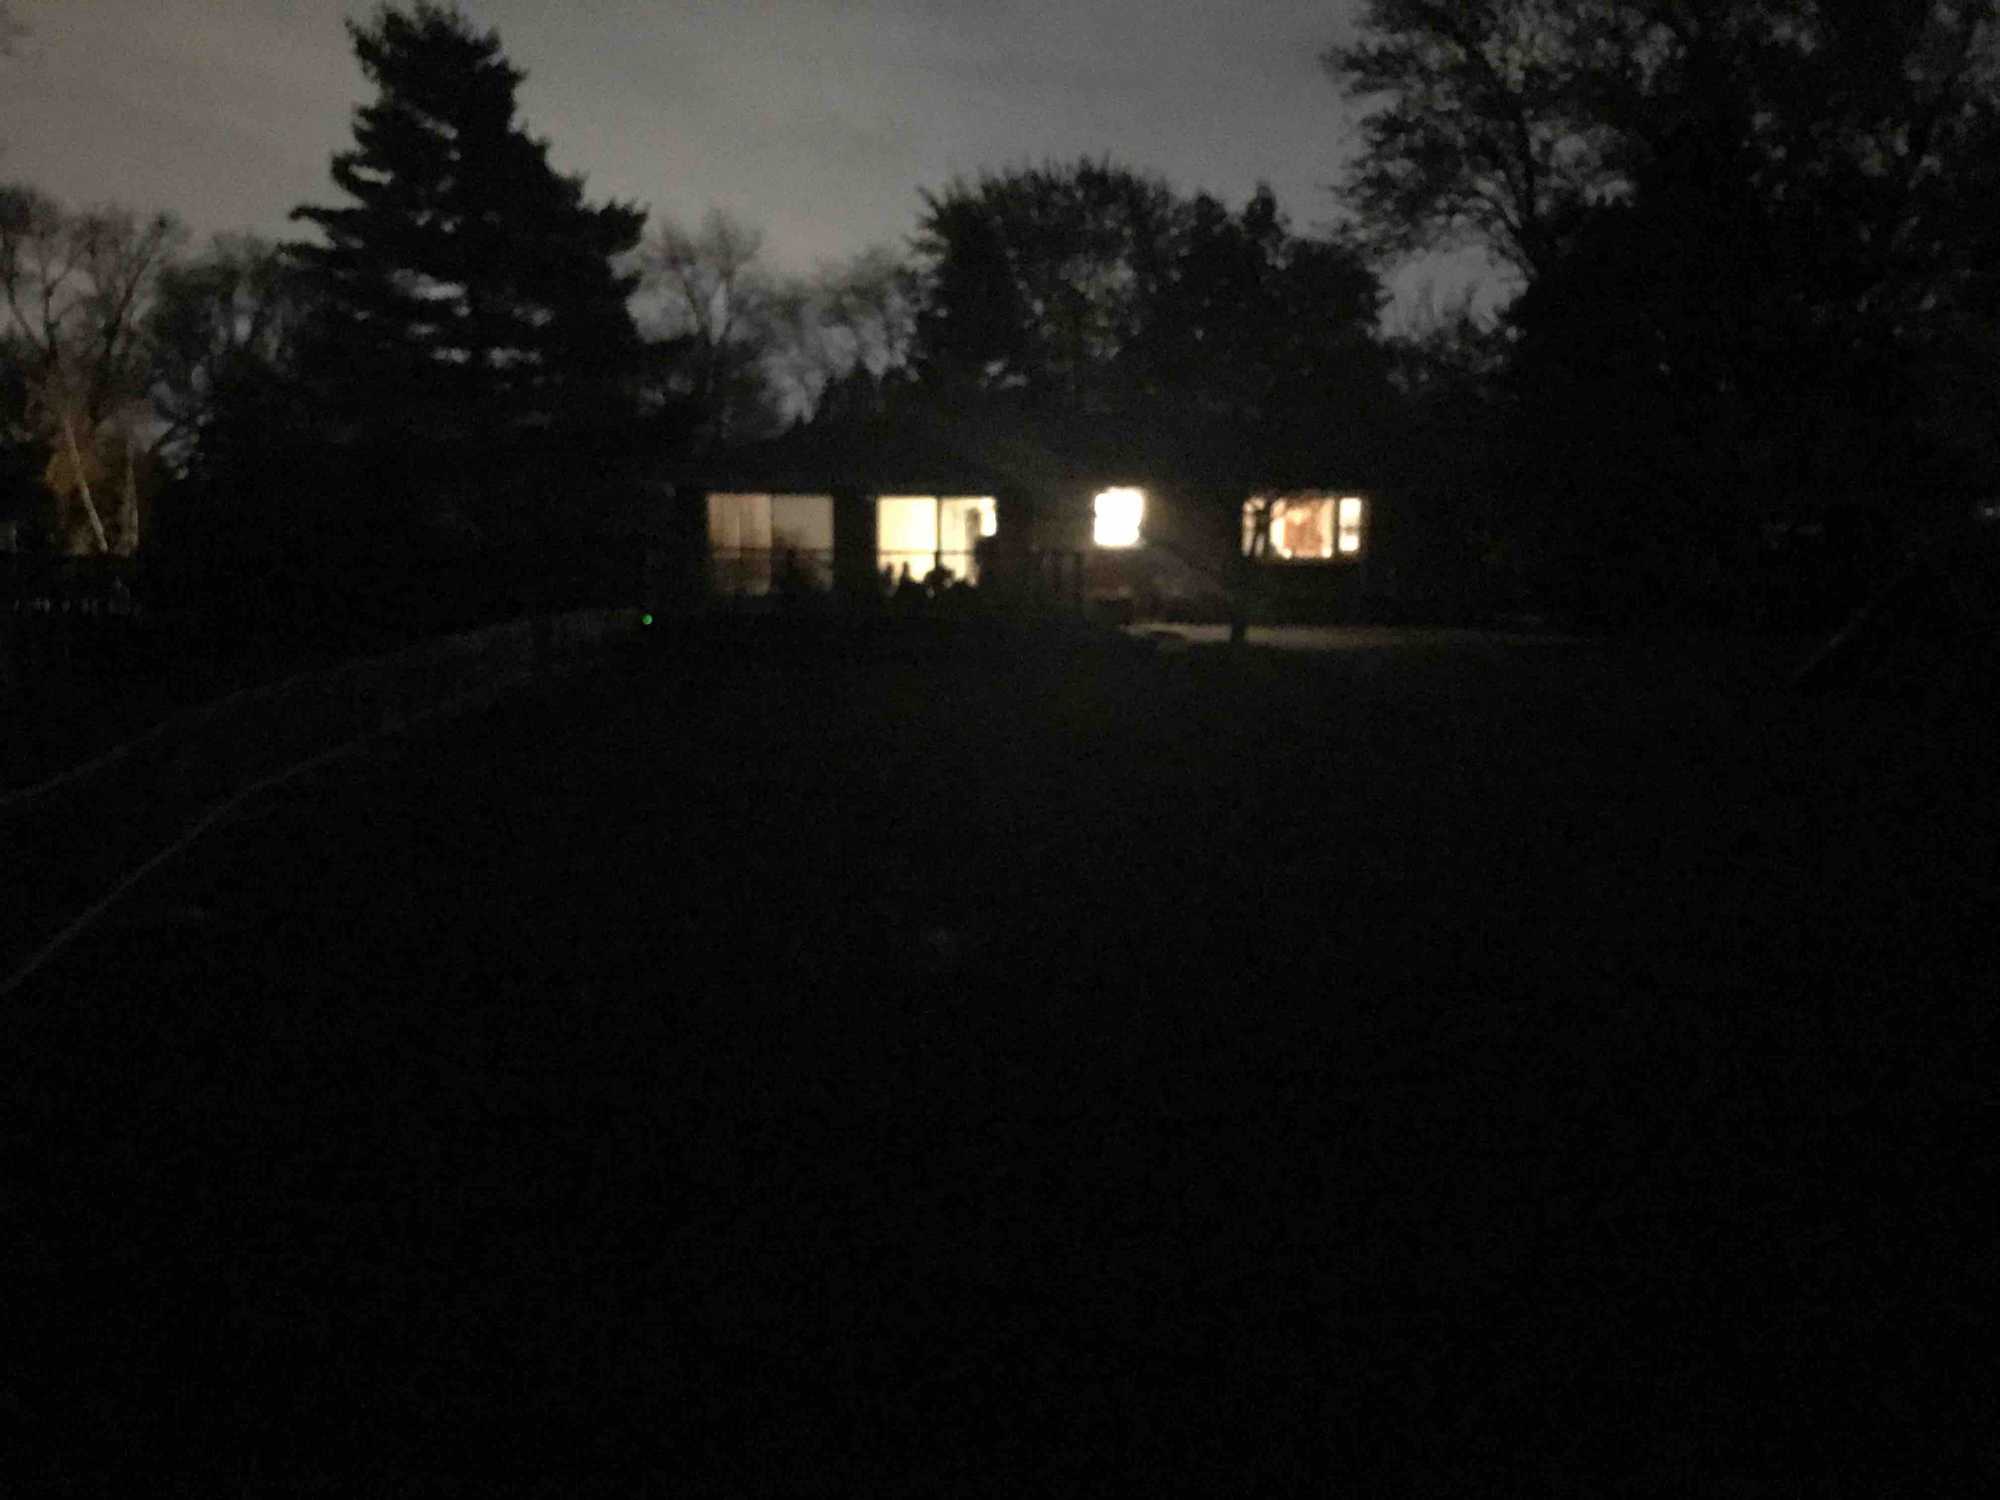 Dark yard with the house about 100ft away